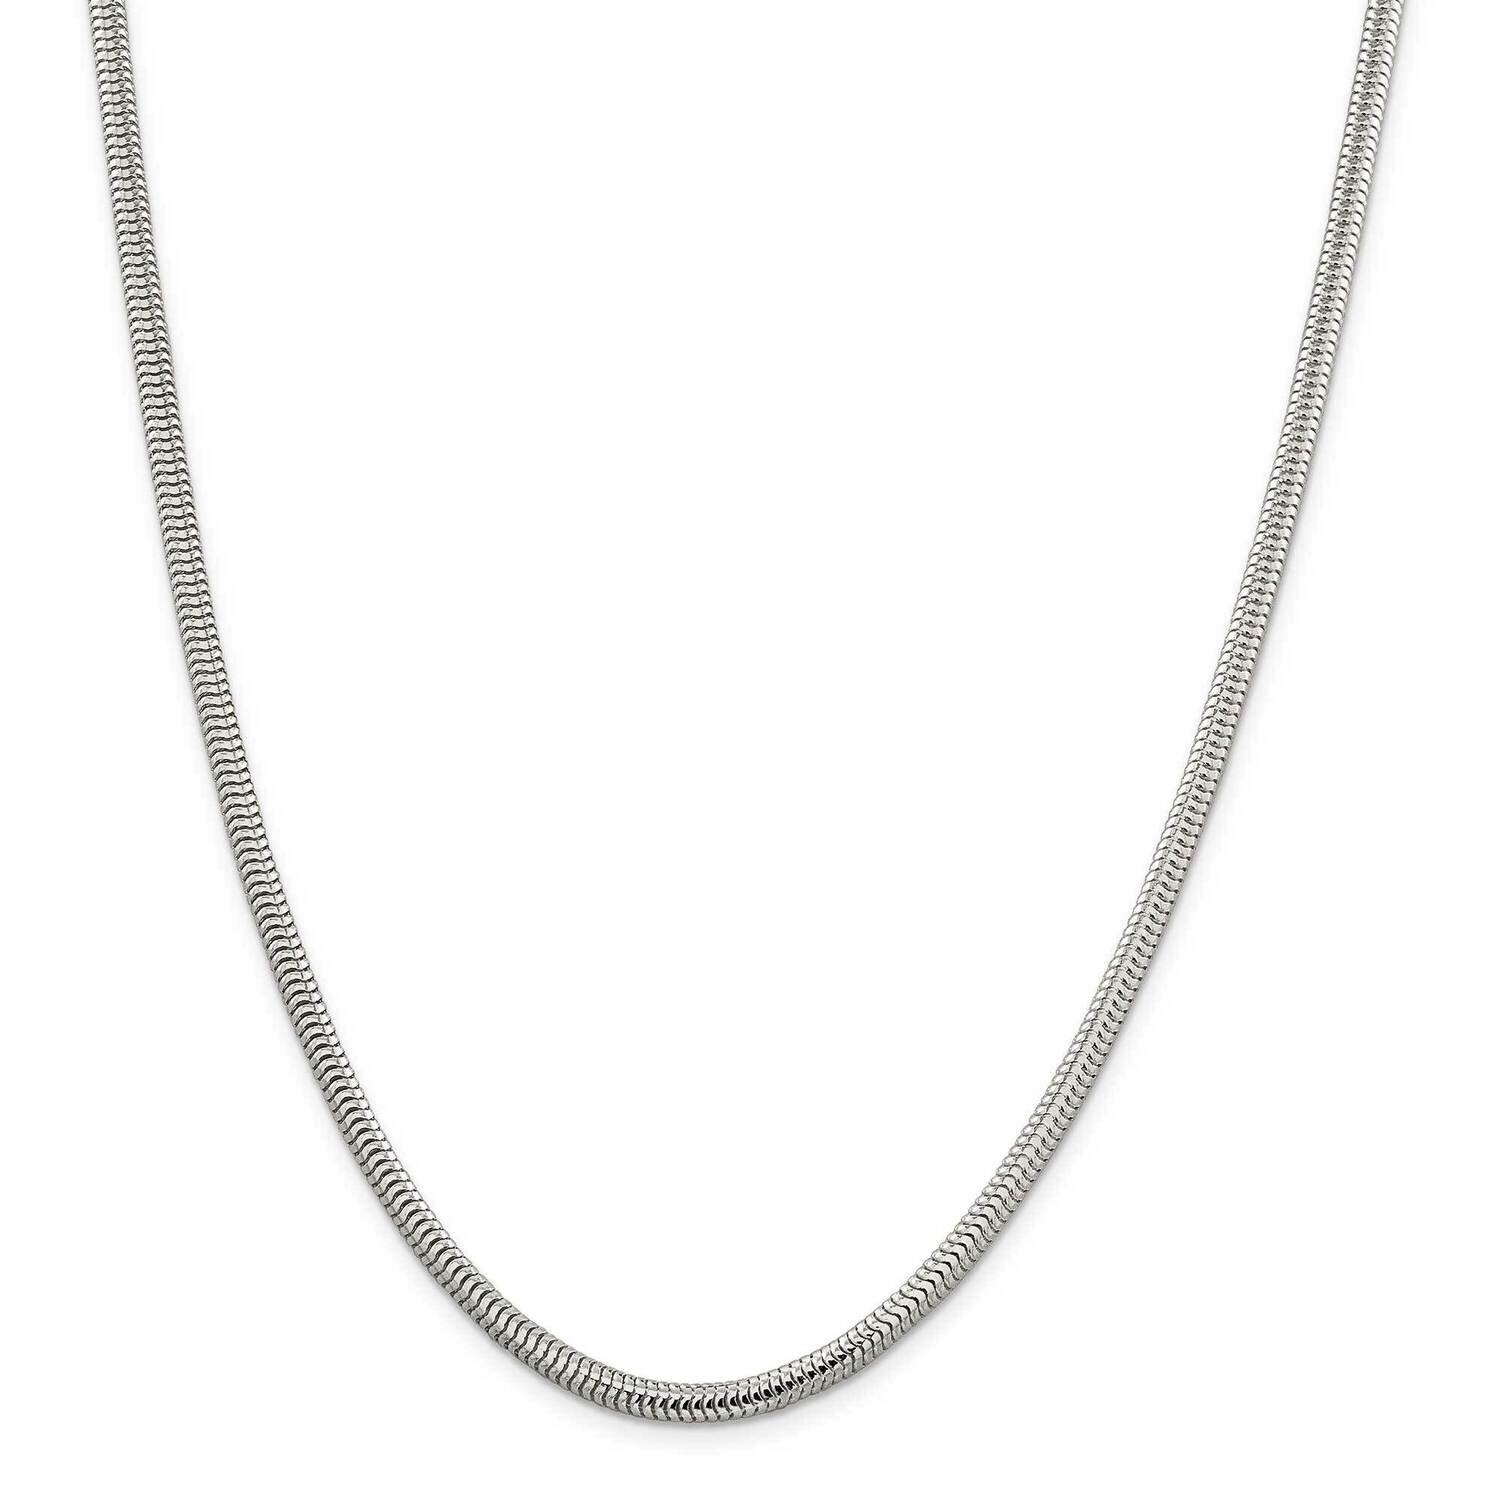 4mm Round Snake Chain 28 Inch Sterling Silver QSNL100-28